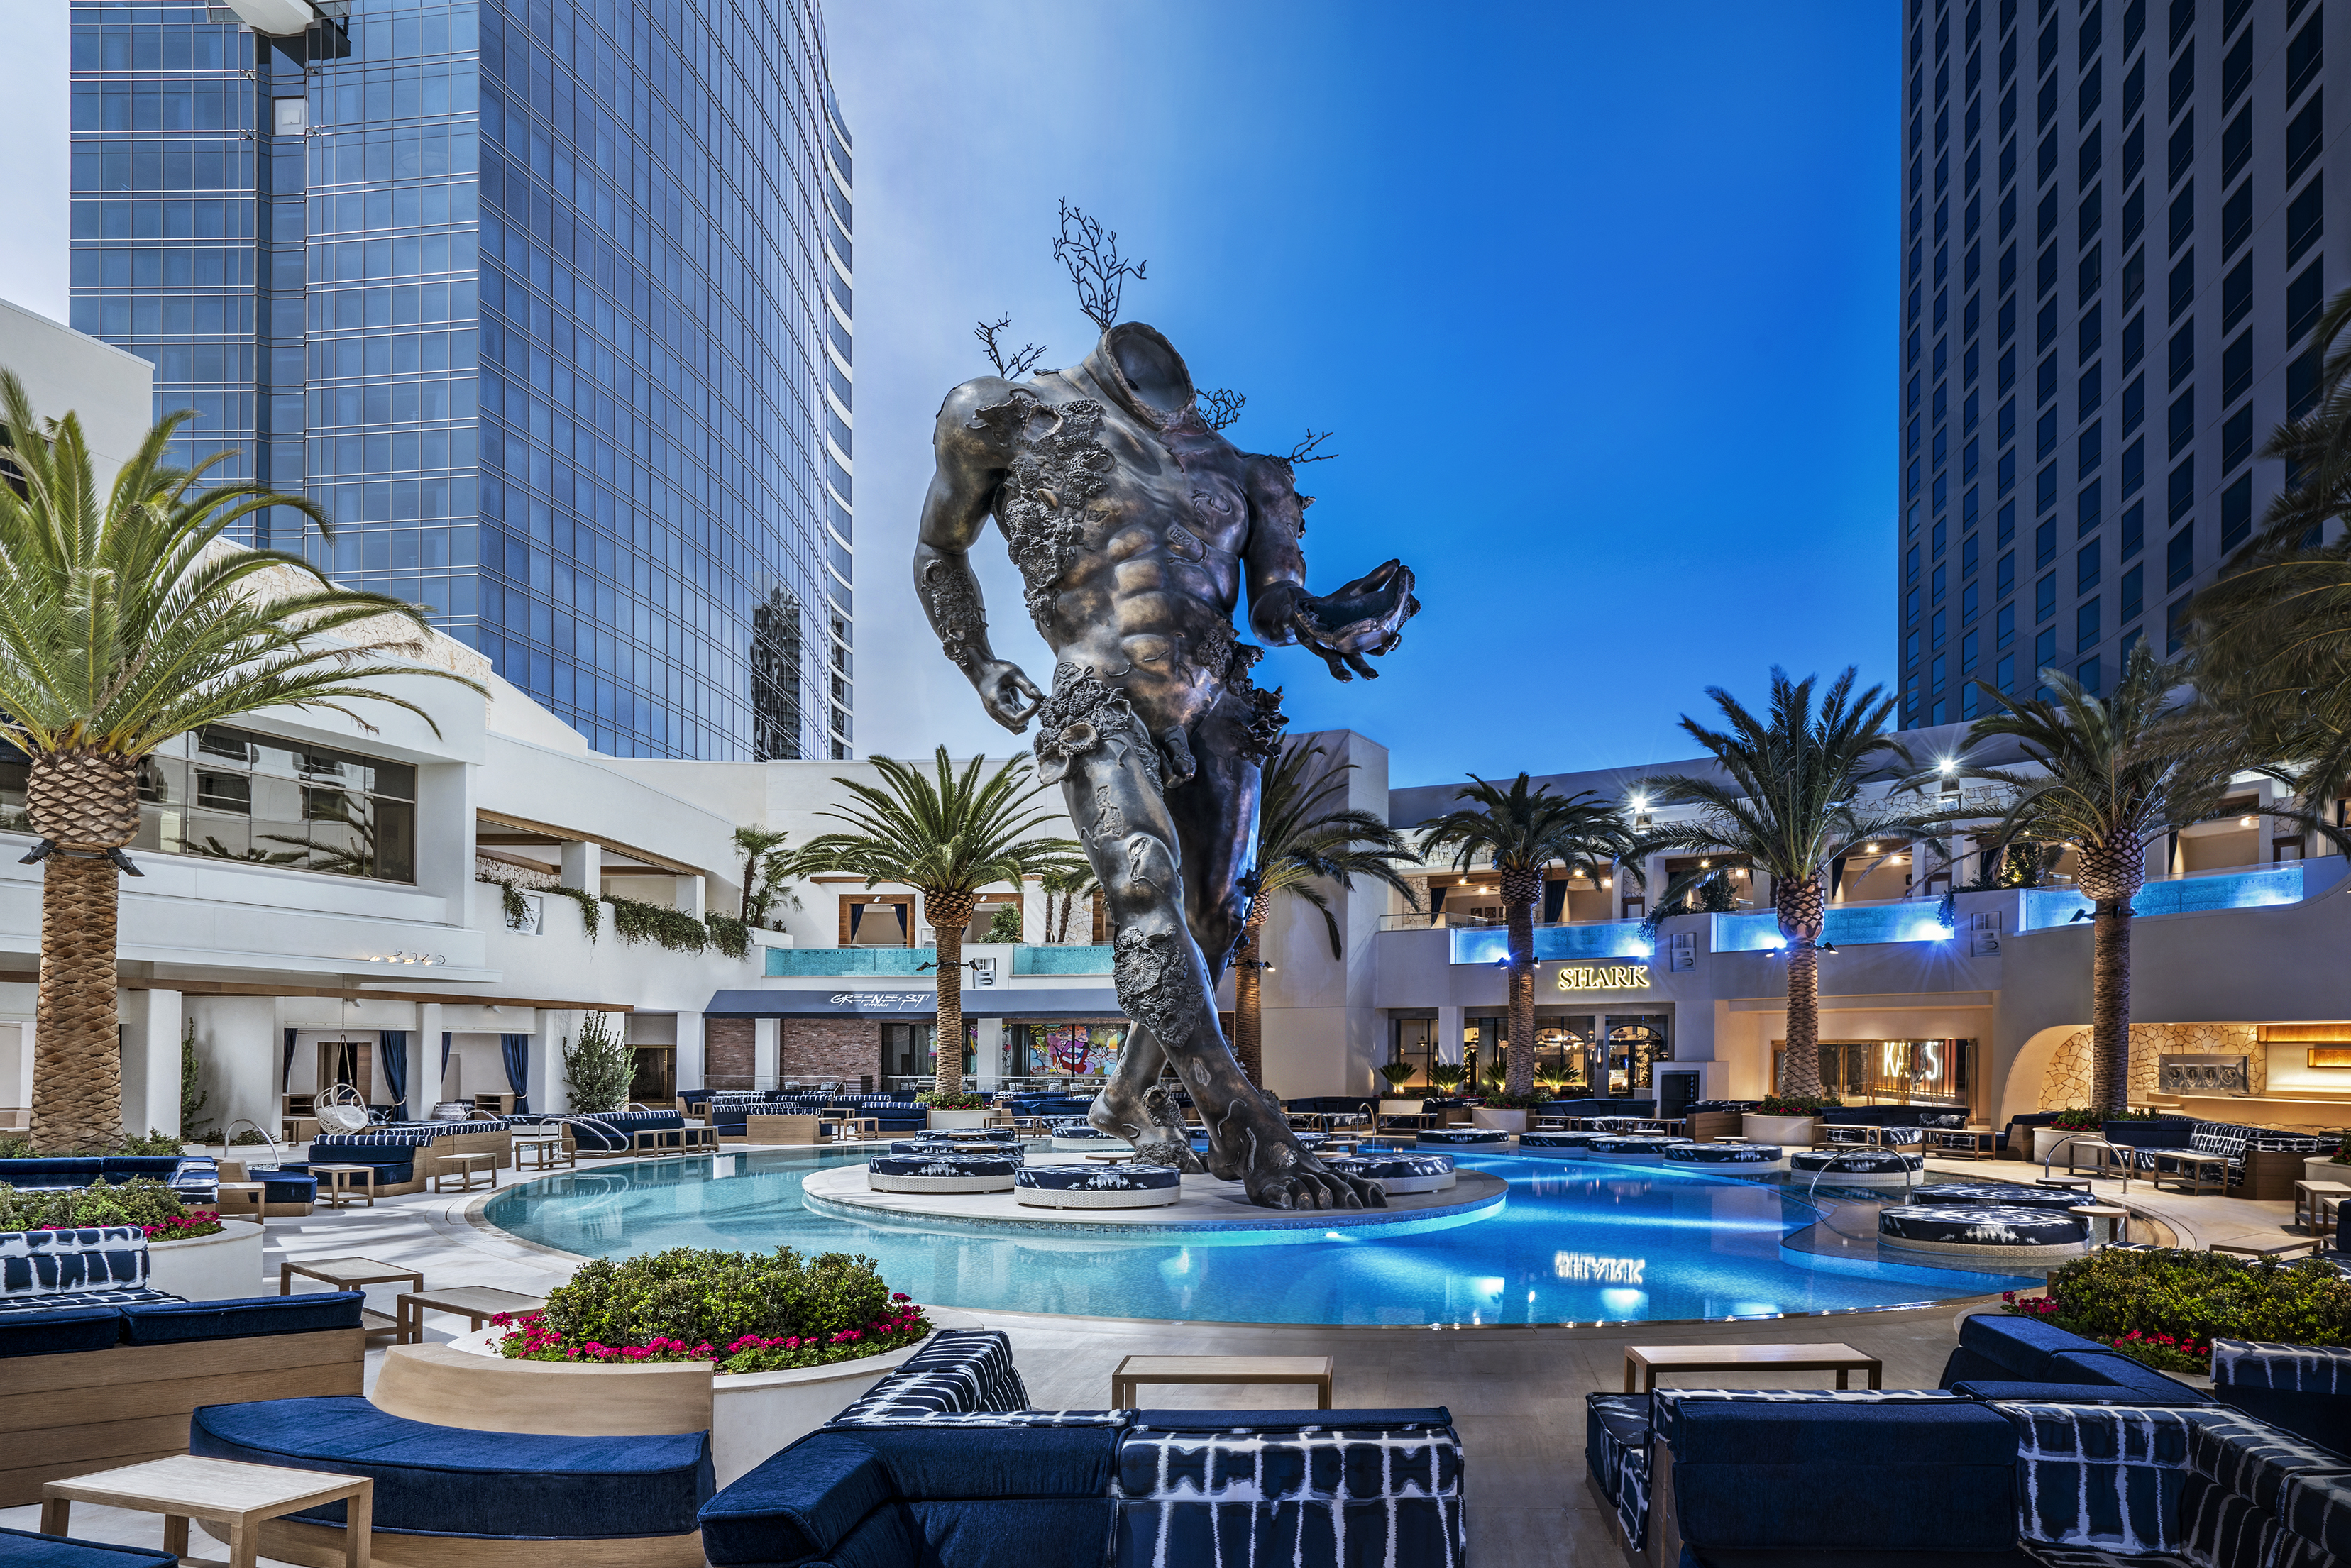 Damien Hirst’s “Demon with Bowl” anchors the new Kaos pool club at the Palms.